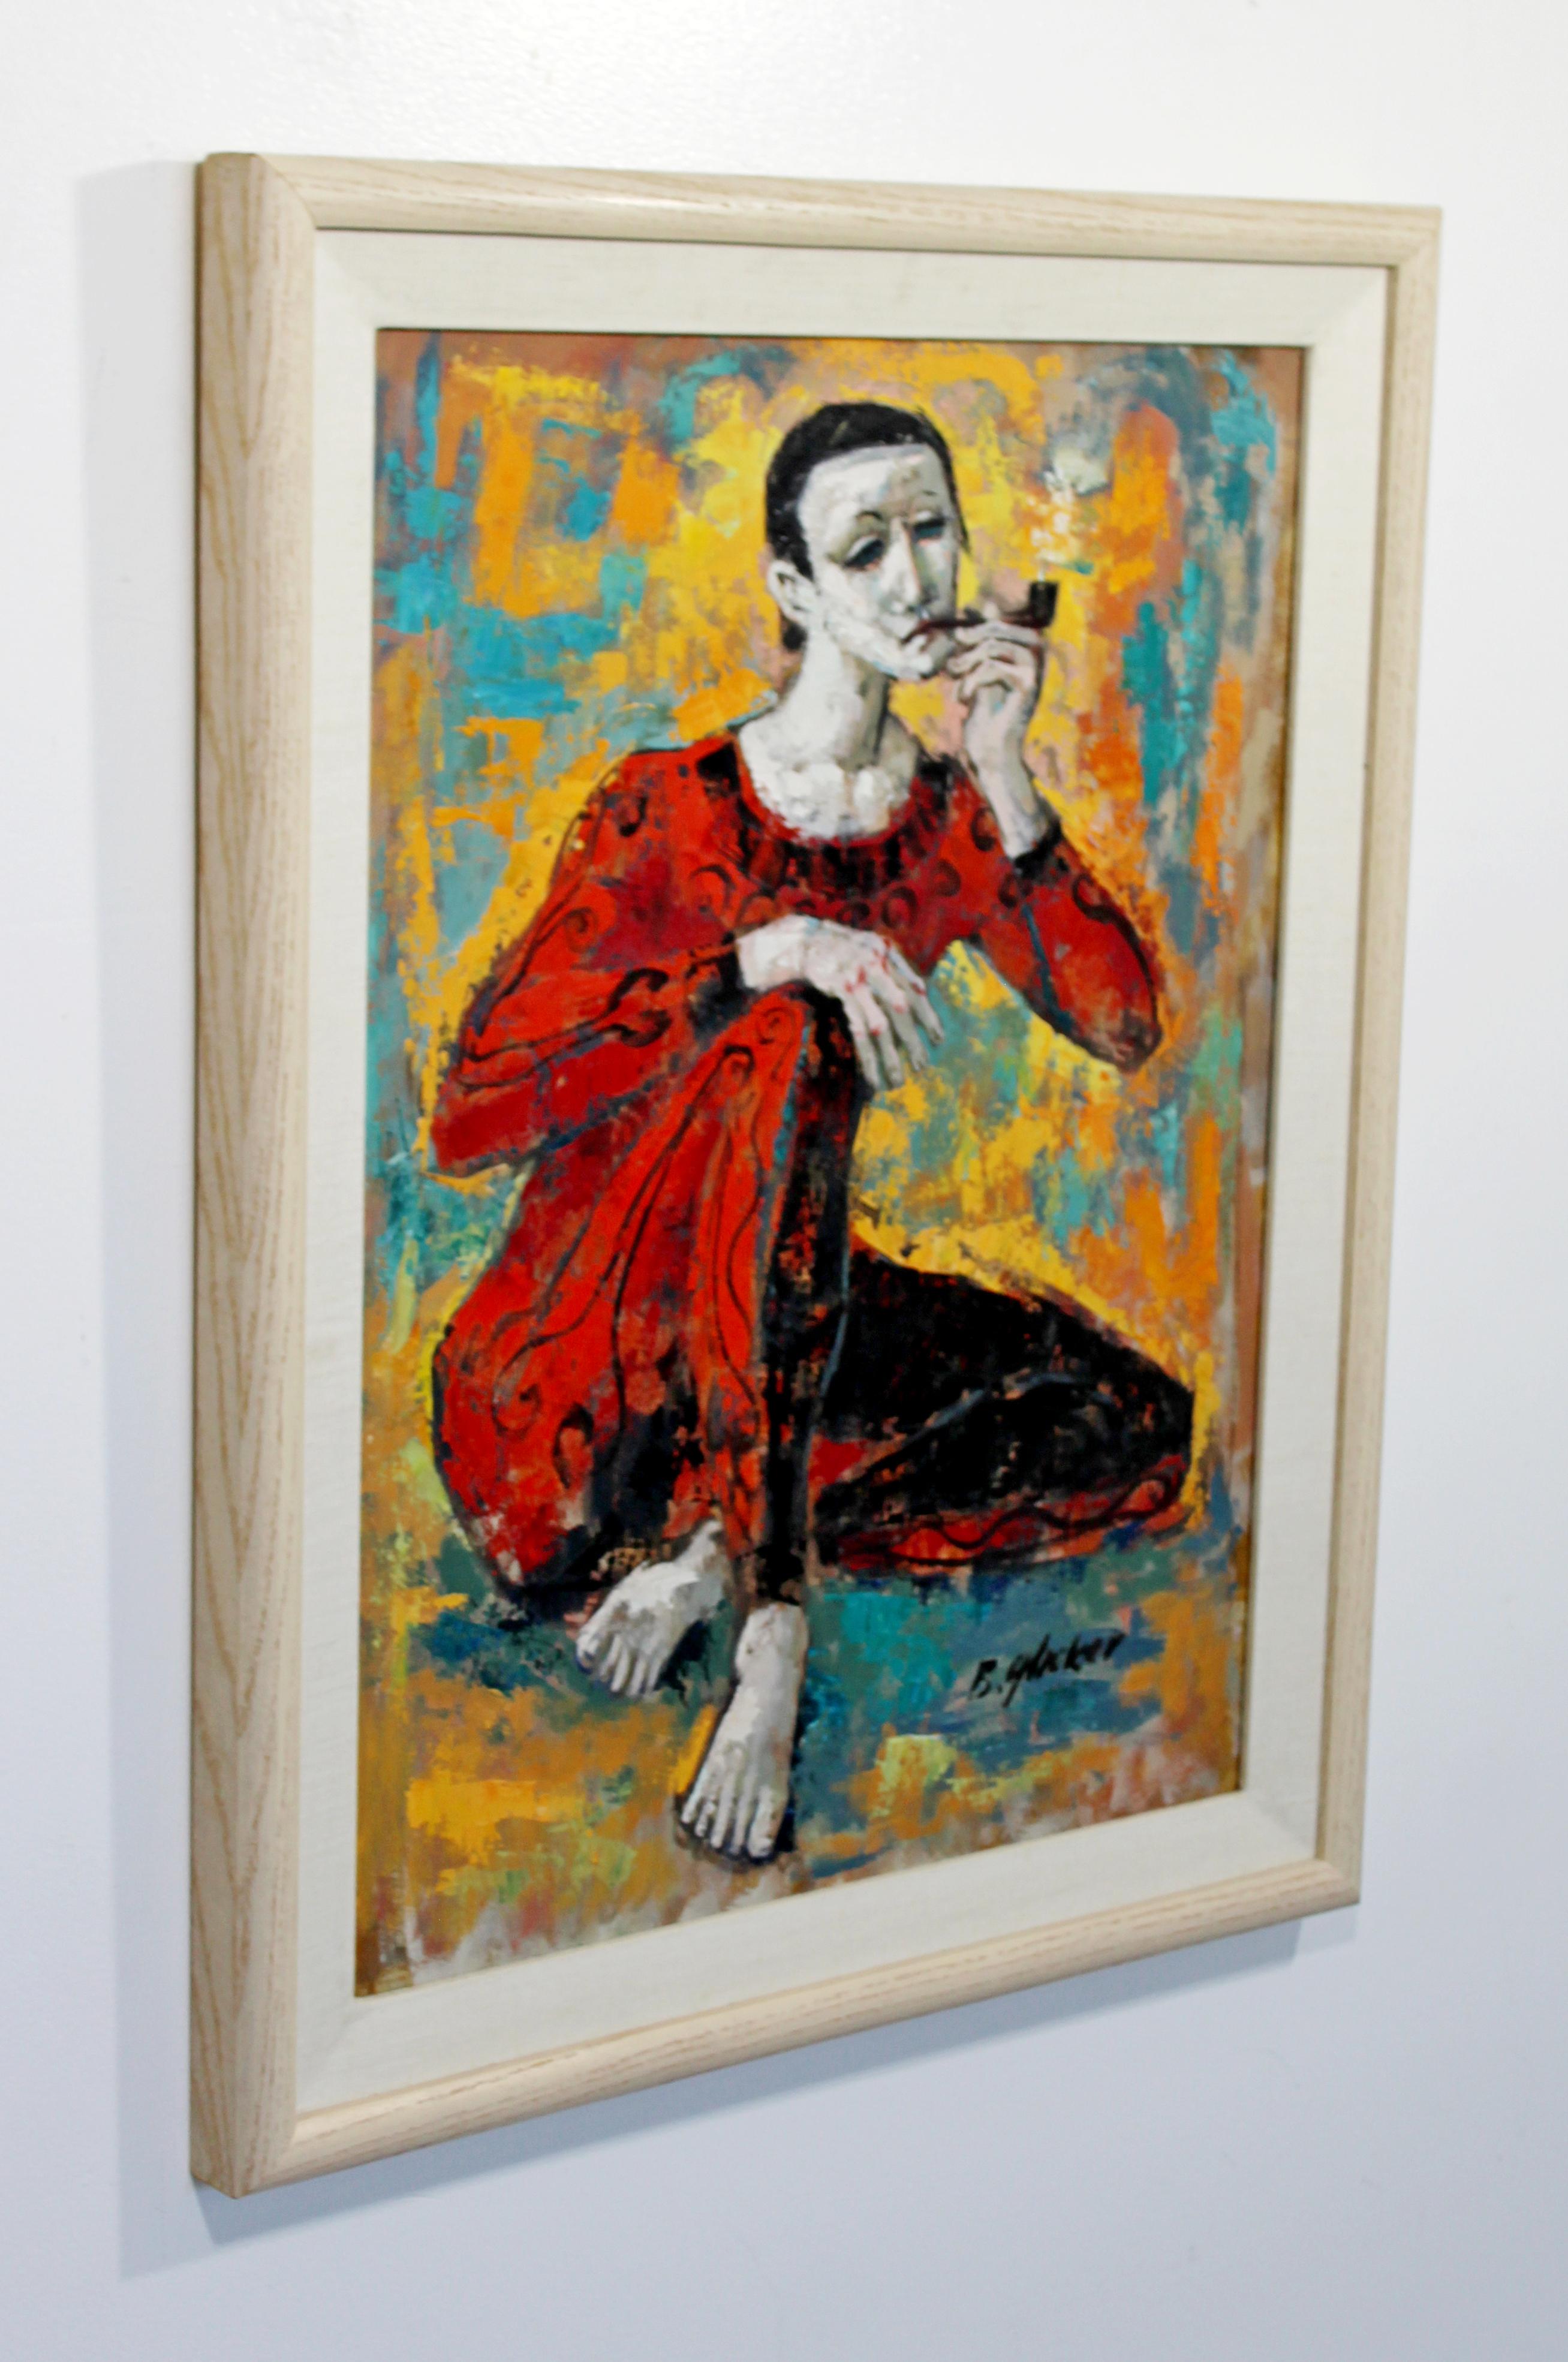 For your consideration is a unique, framed, oil on canvas painting of a figure smoking a pipe, signed by Benjamin Glicker. In excellent condition. The dimensions are 21.5